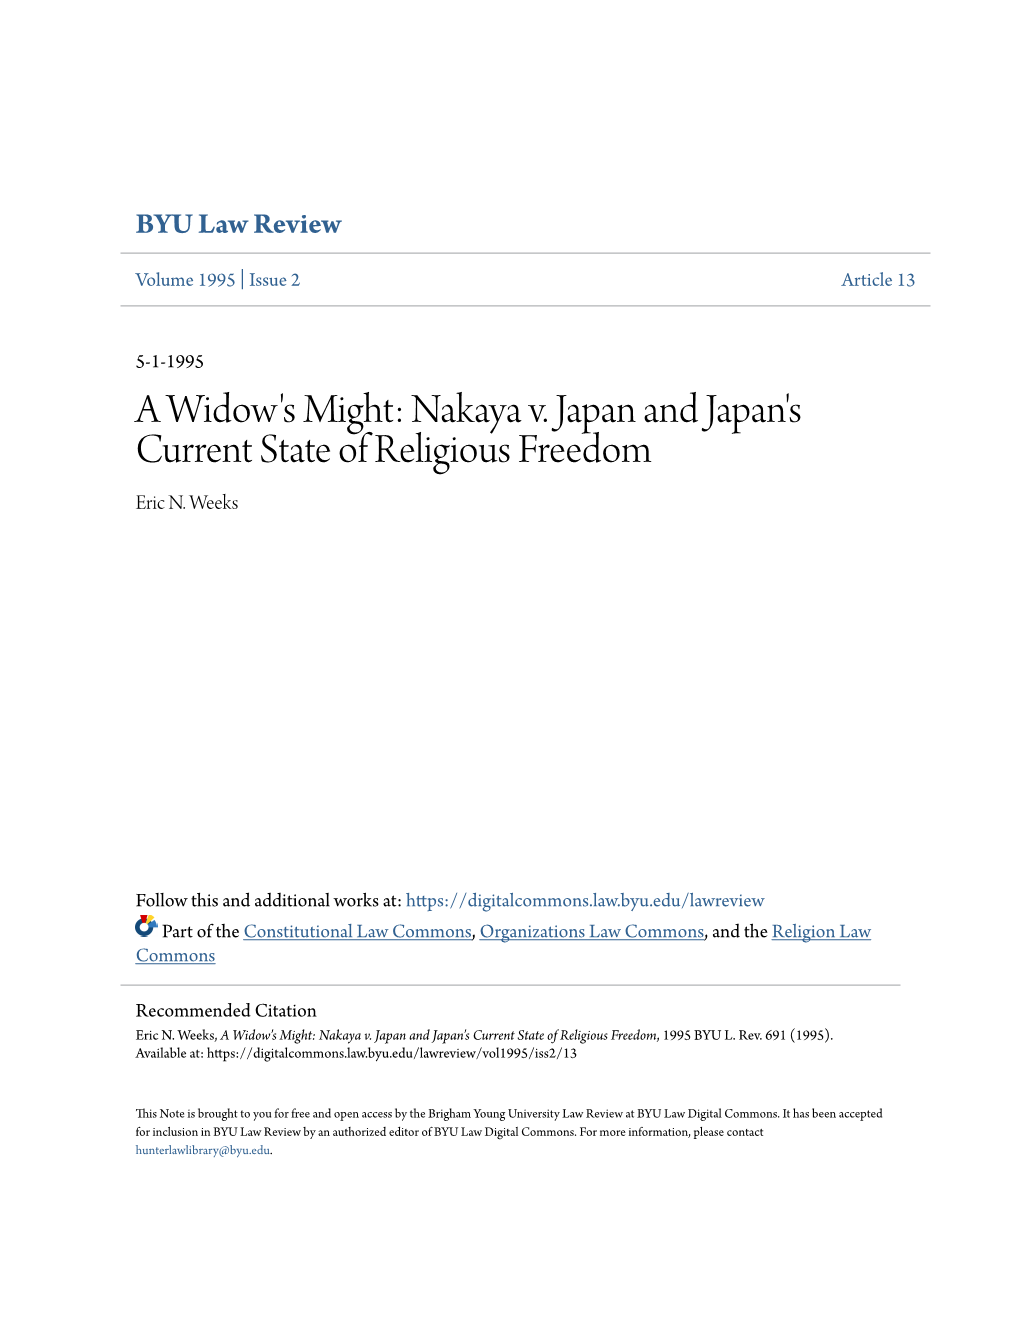 Nakaya V. Japan and Japan's Current State of Religious Freedom Eric N